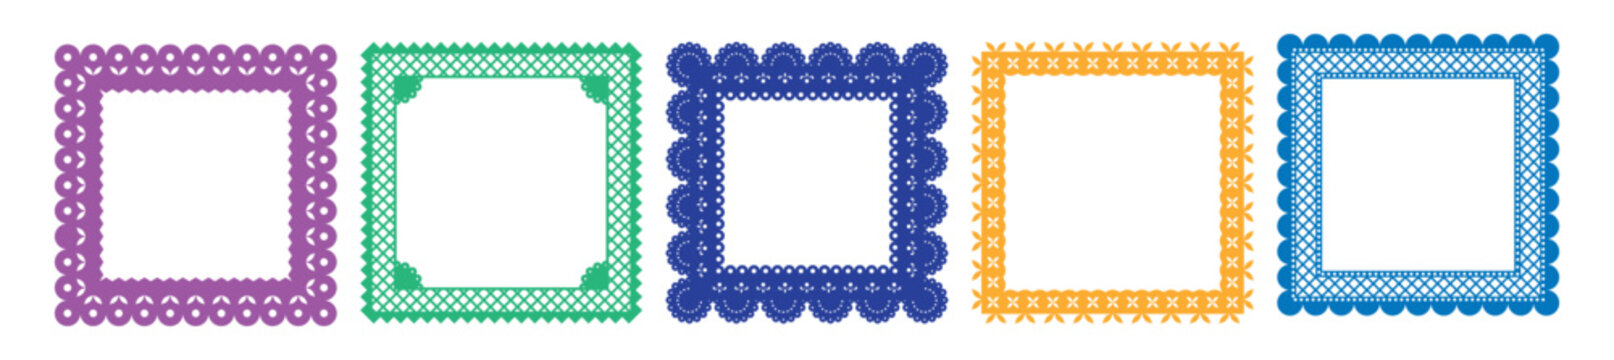 Papel picado square frames. Traditional mexican style cut out templates for greeting card, banner, flier. Vector illustration.